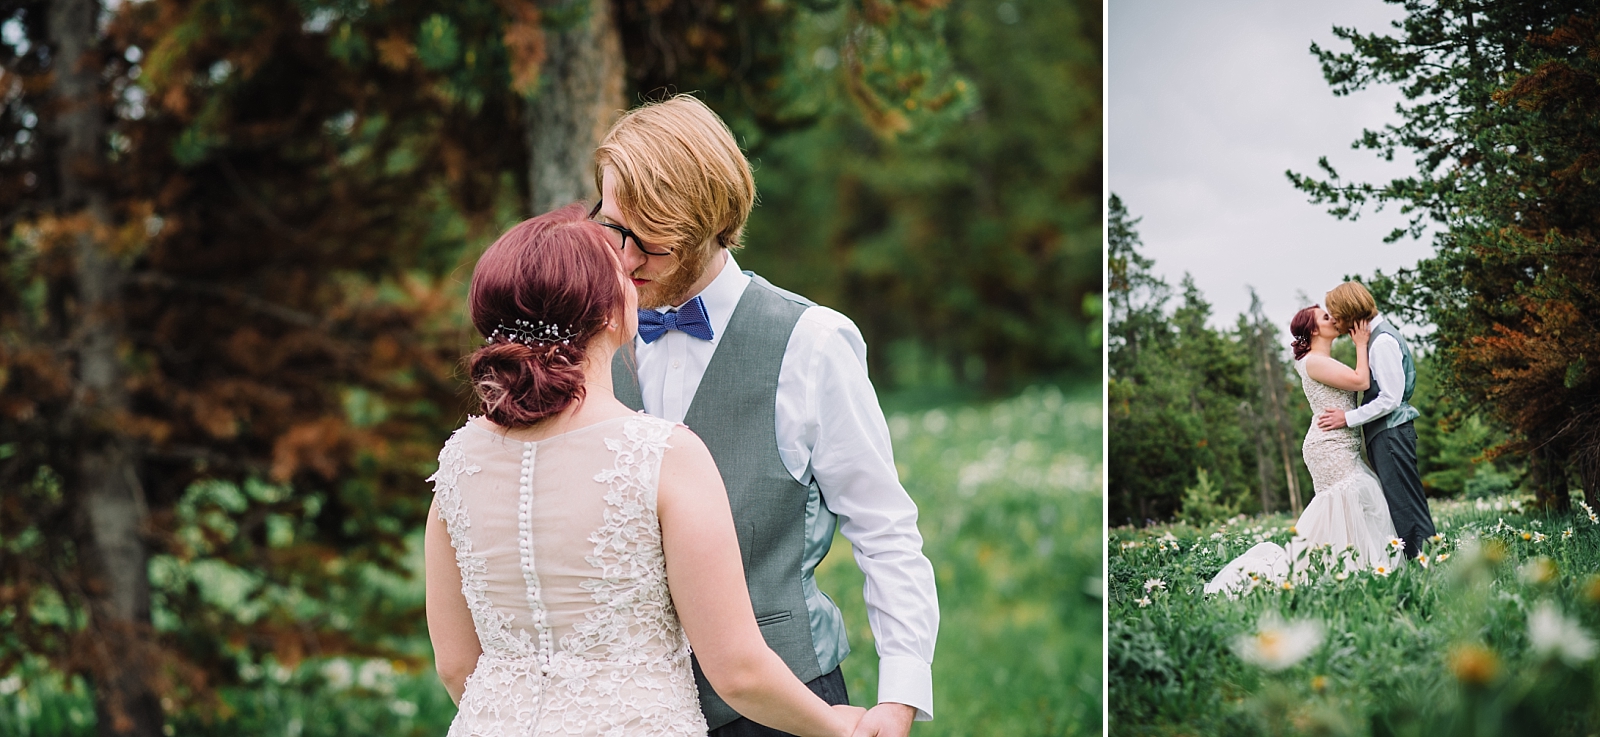 engaged couple seeing one another before elopement during first look